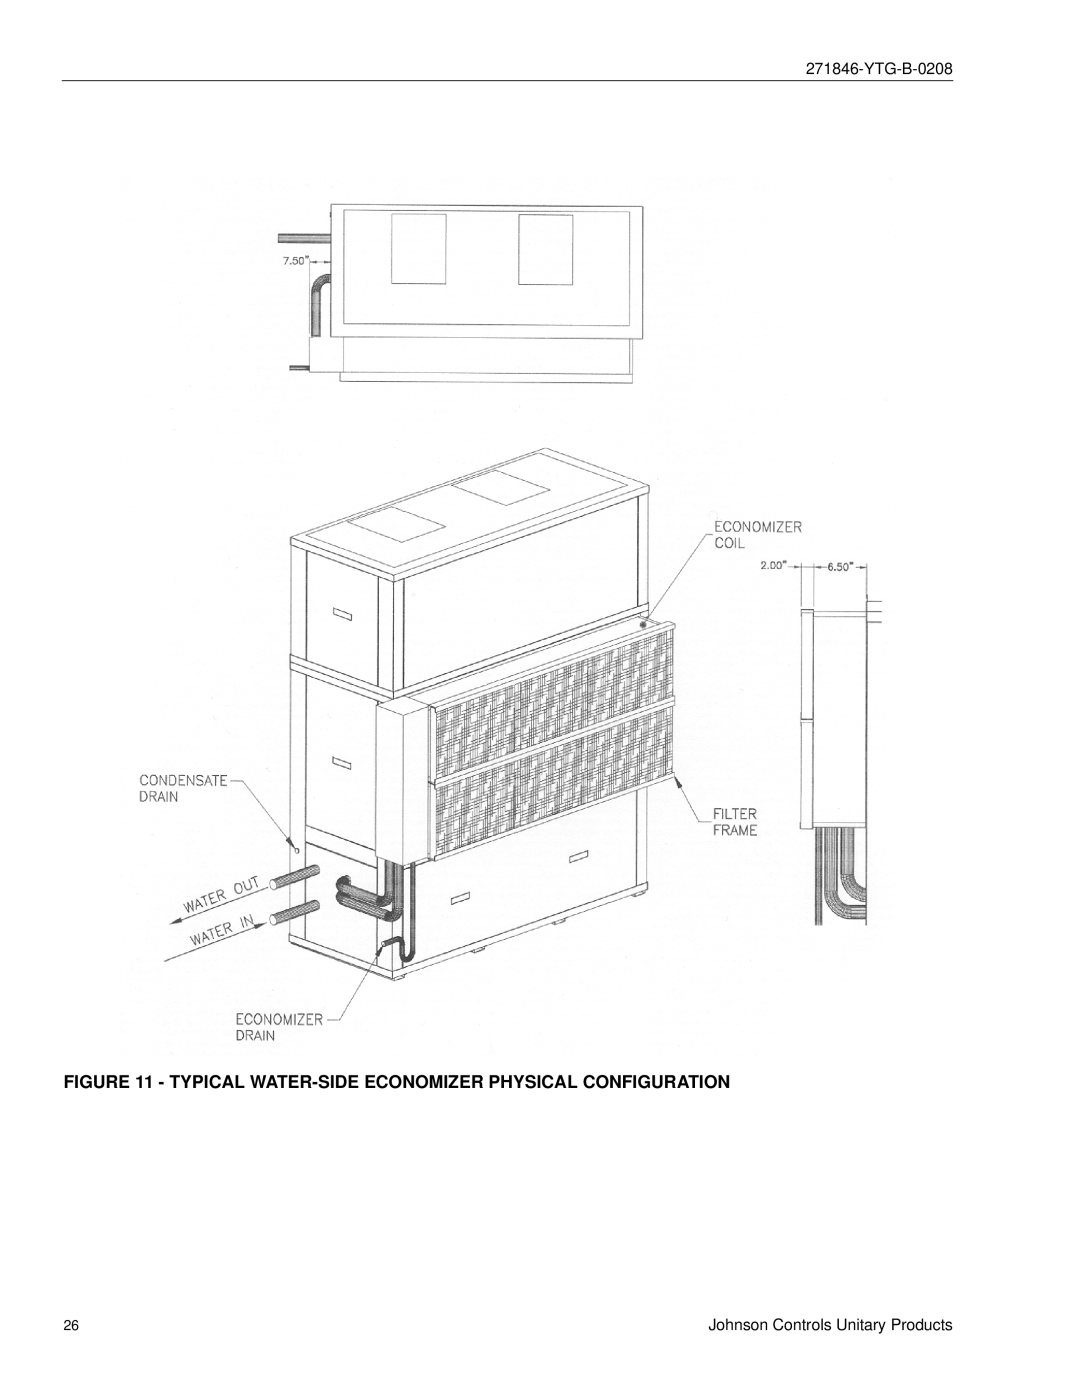 York CU060 - 300 manual Typical WATER-SIDE Economizer Physical Configuration 